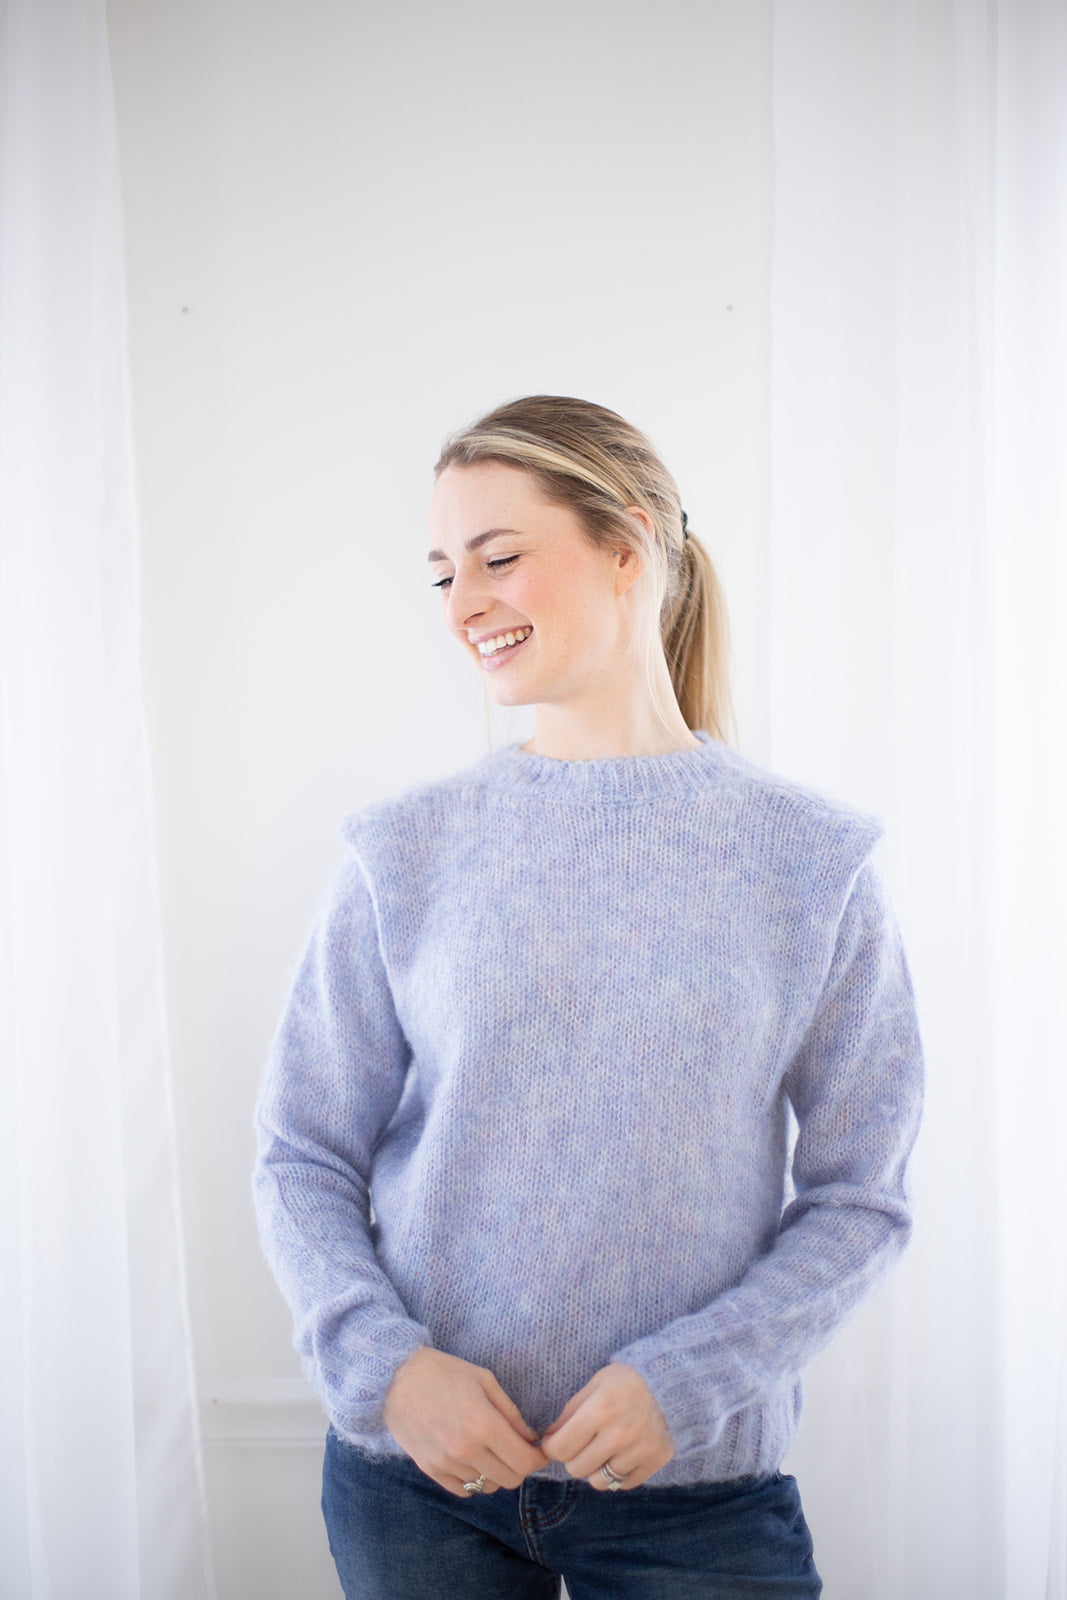 Periwinkle Pullover – Then I Met You